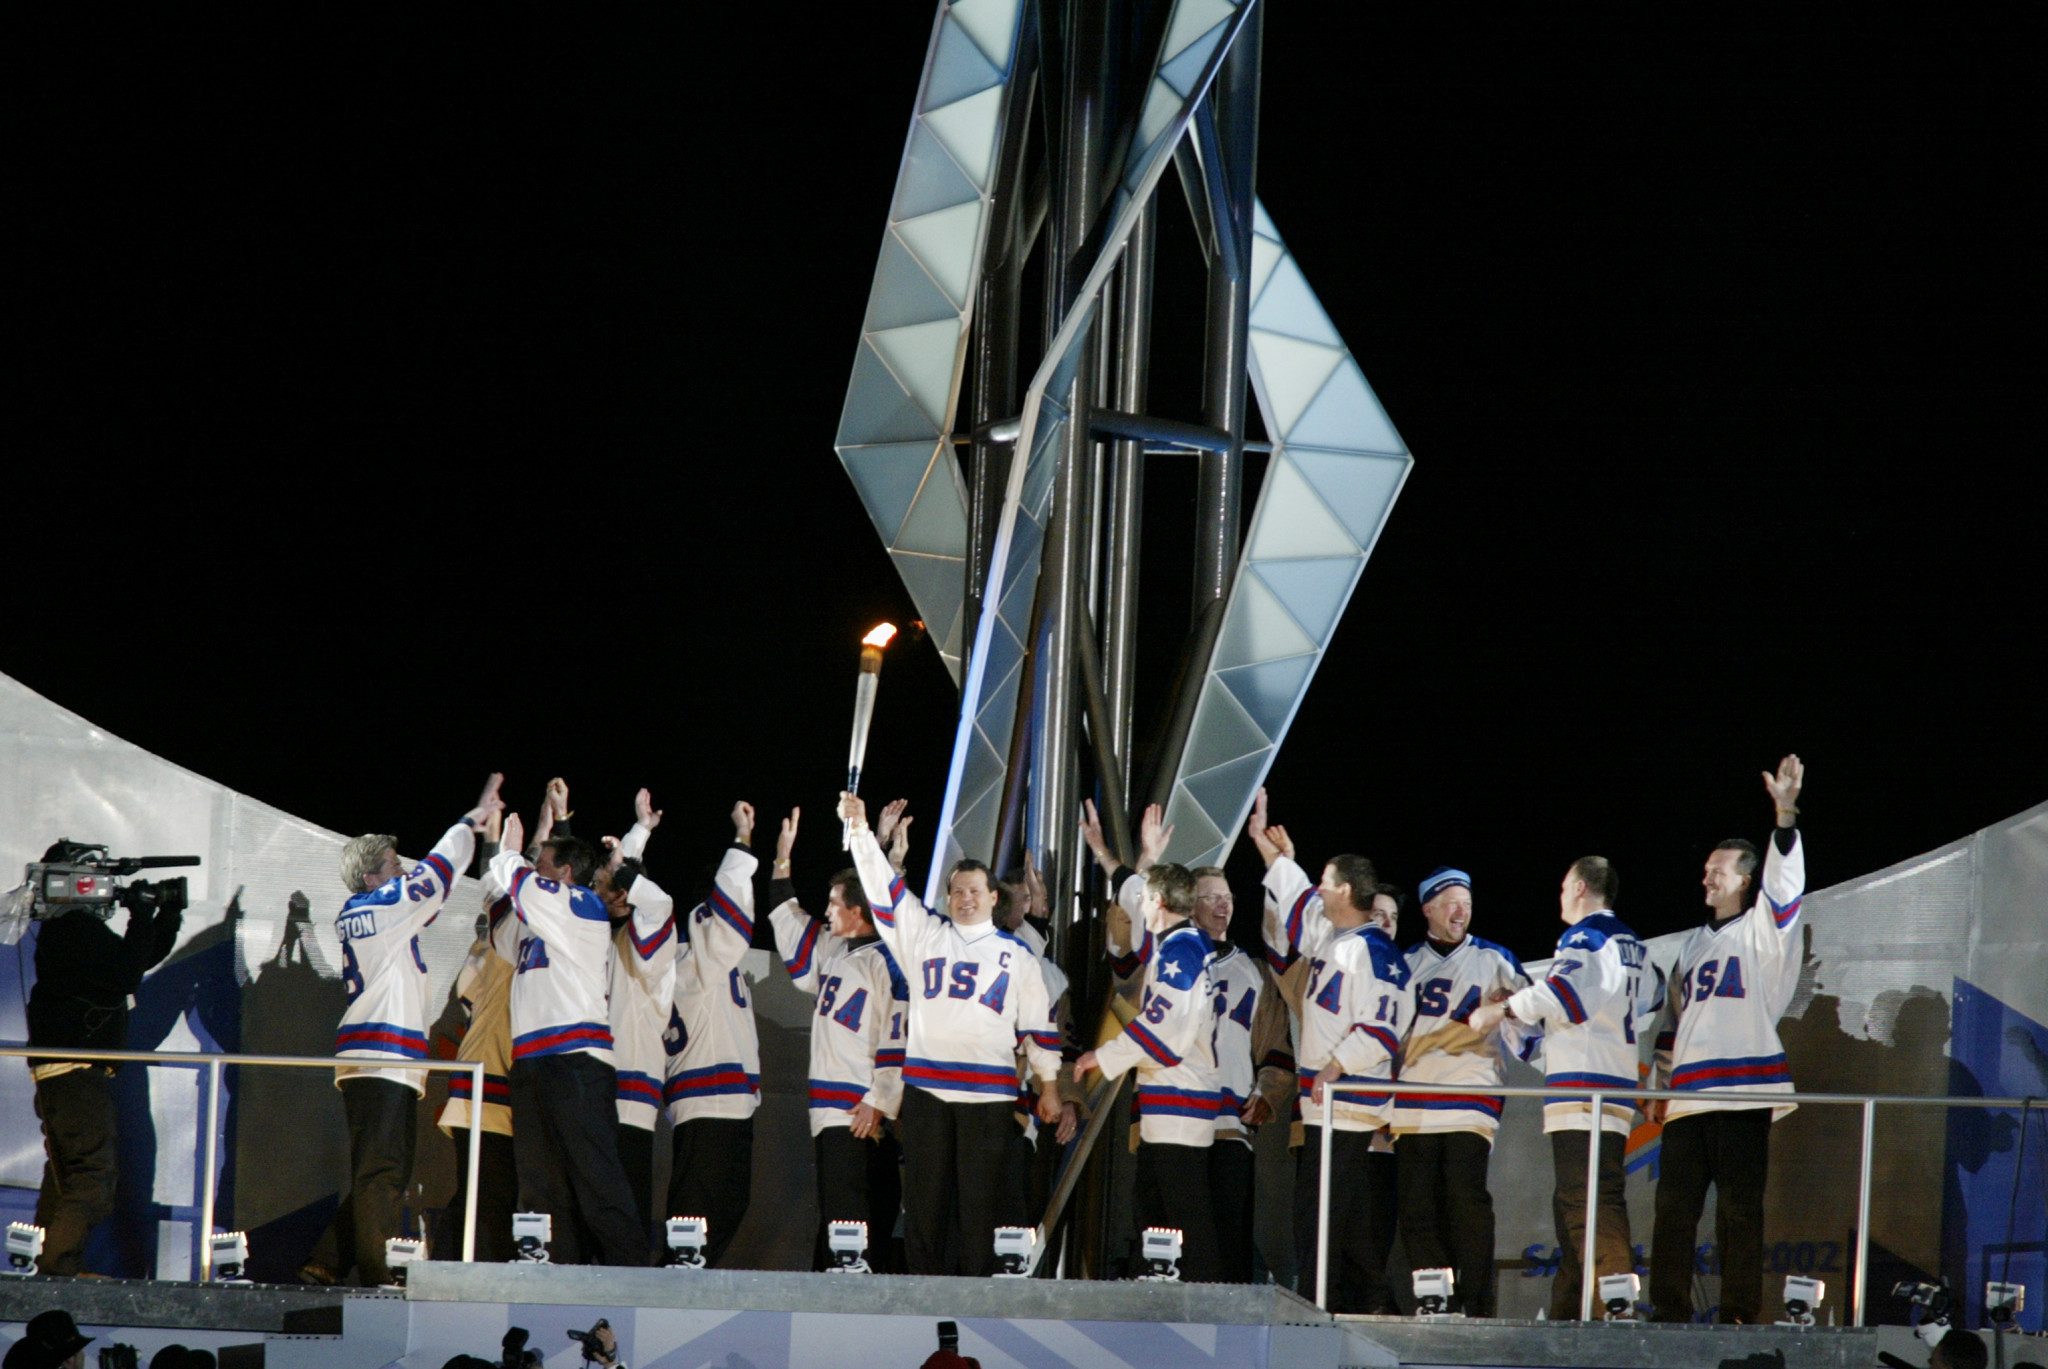 The US team which won the ice hockey title at the Lake Placid 1980 Olympics lights the Cauldron at the Opening Ceremony of the Salt Lake City 2002 Winter Games ©Getty Images